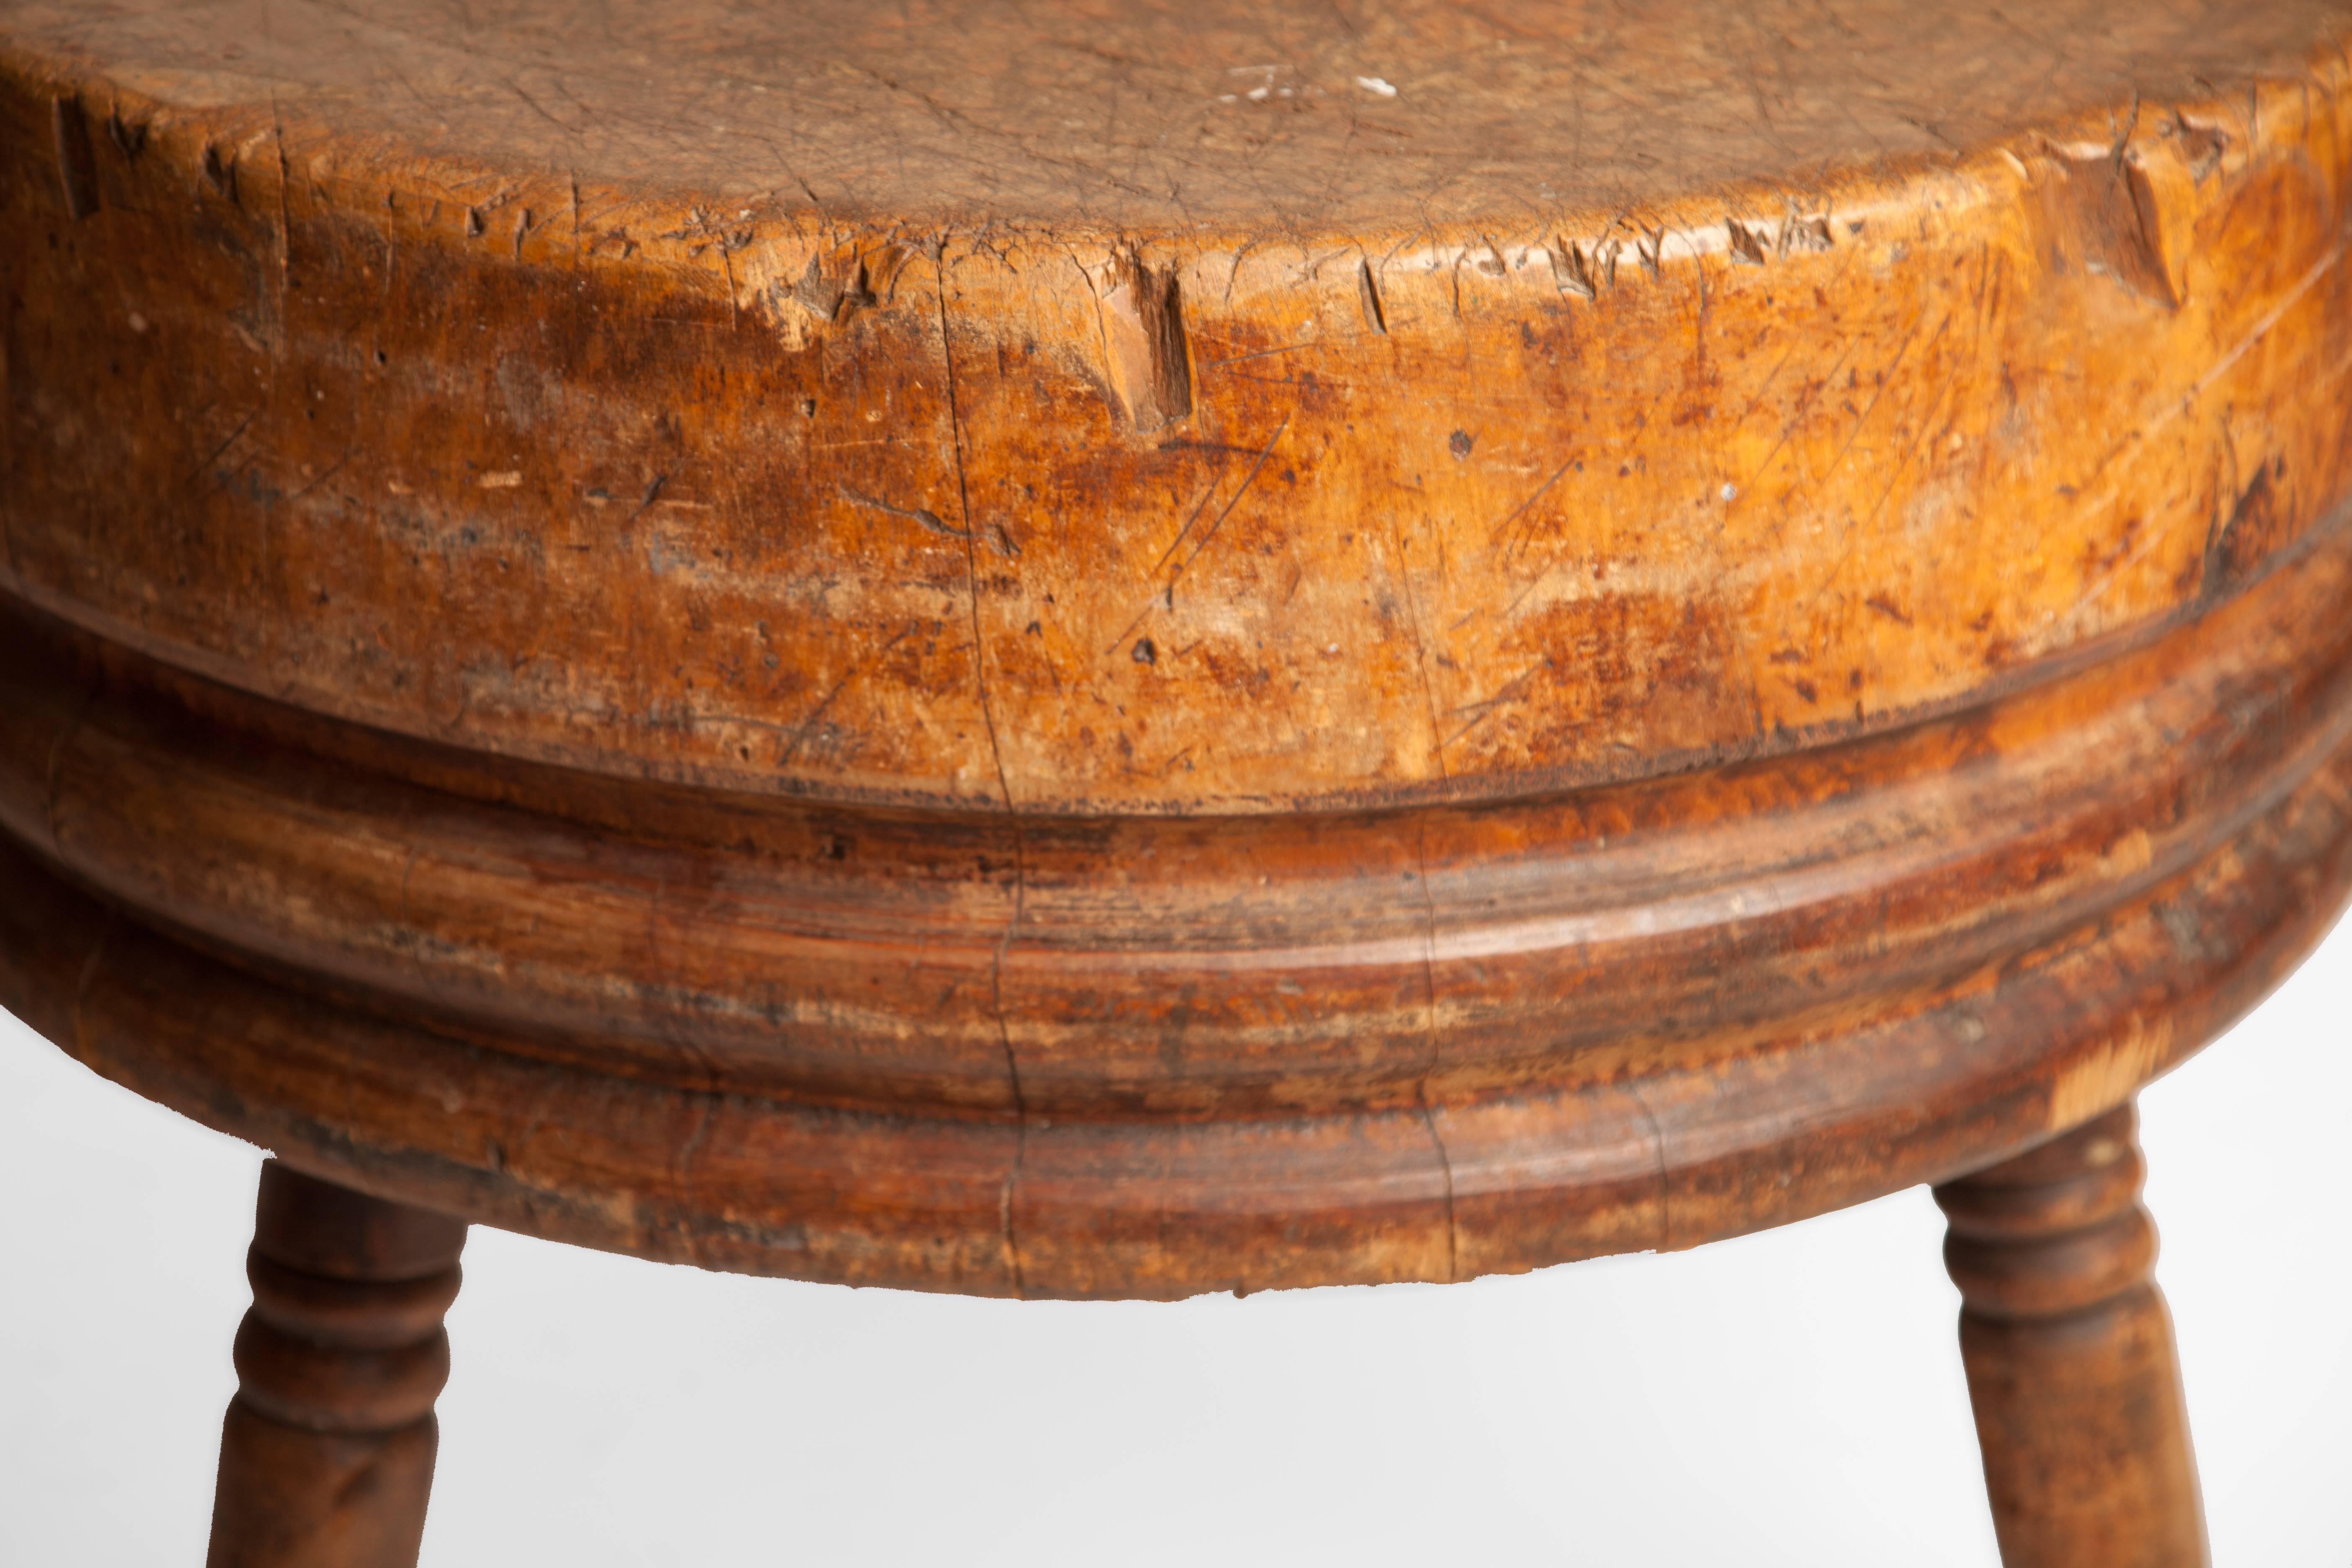 Antique round butcher's block made from a single tree trunk, raised on three turned legs.